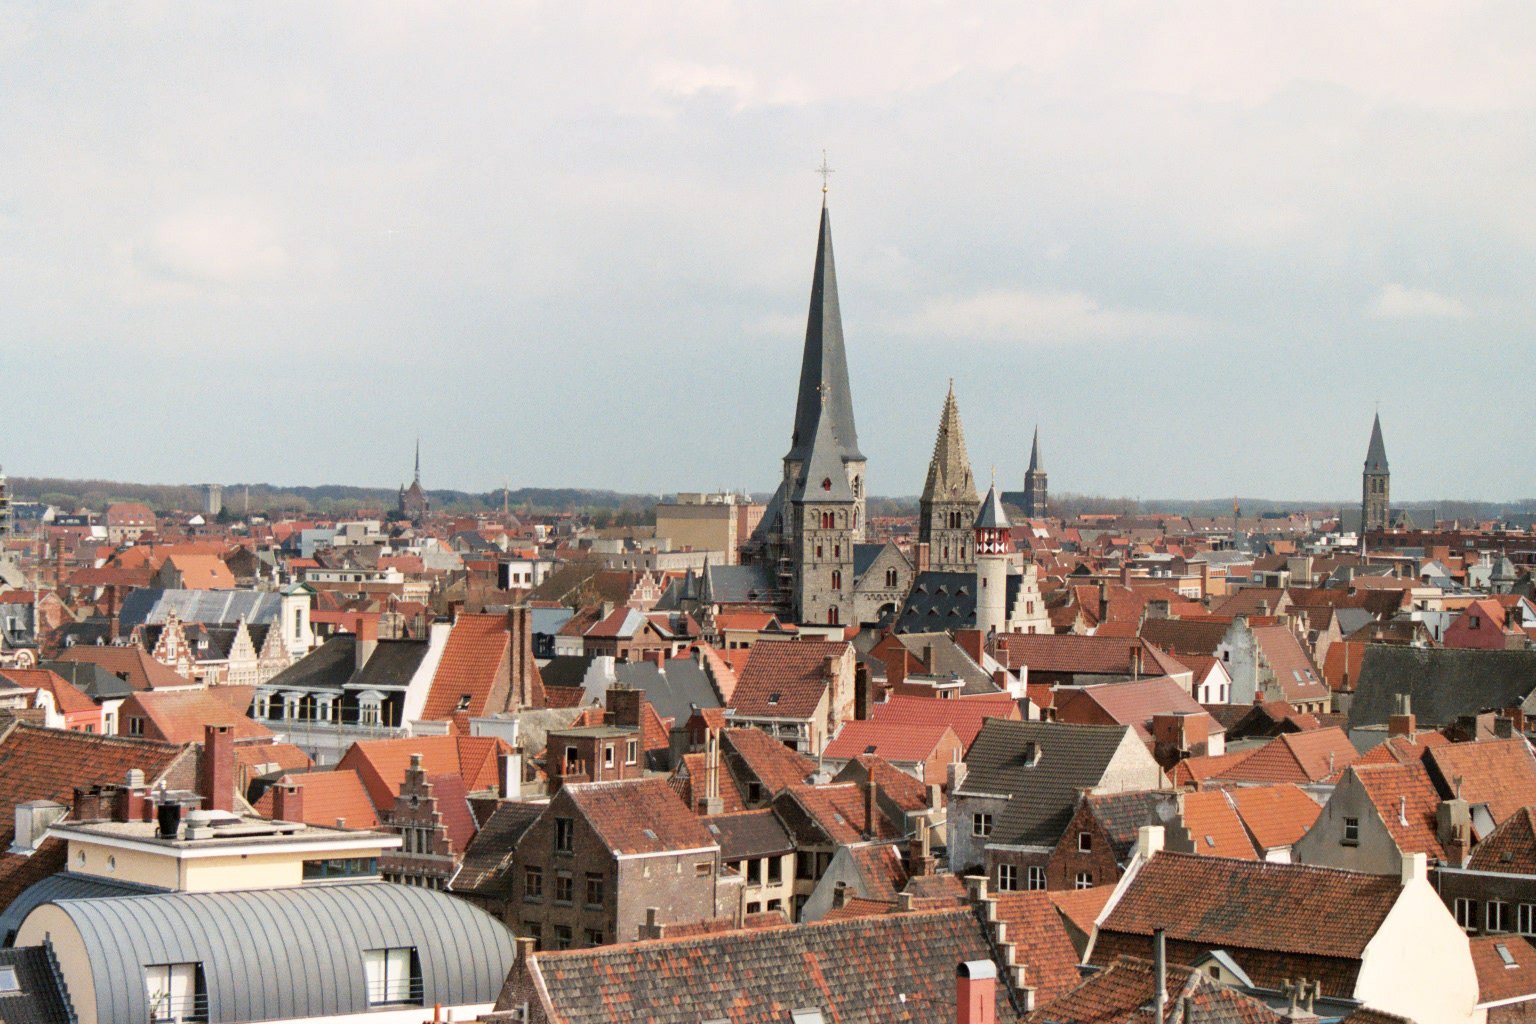 a town filled with brown roof tops covered in tiled roofs